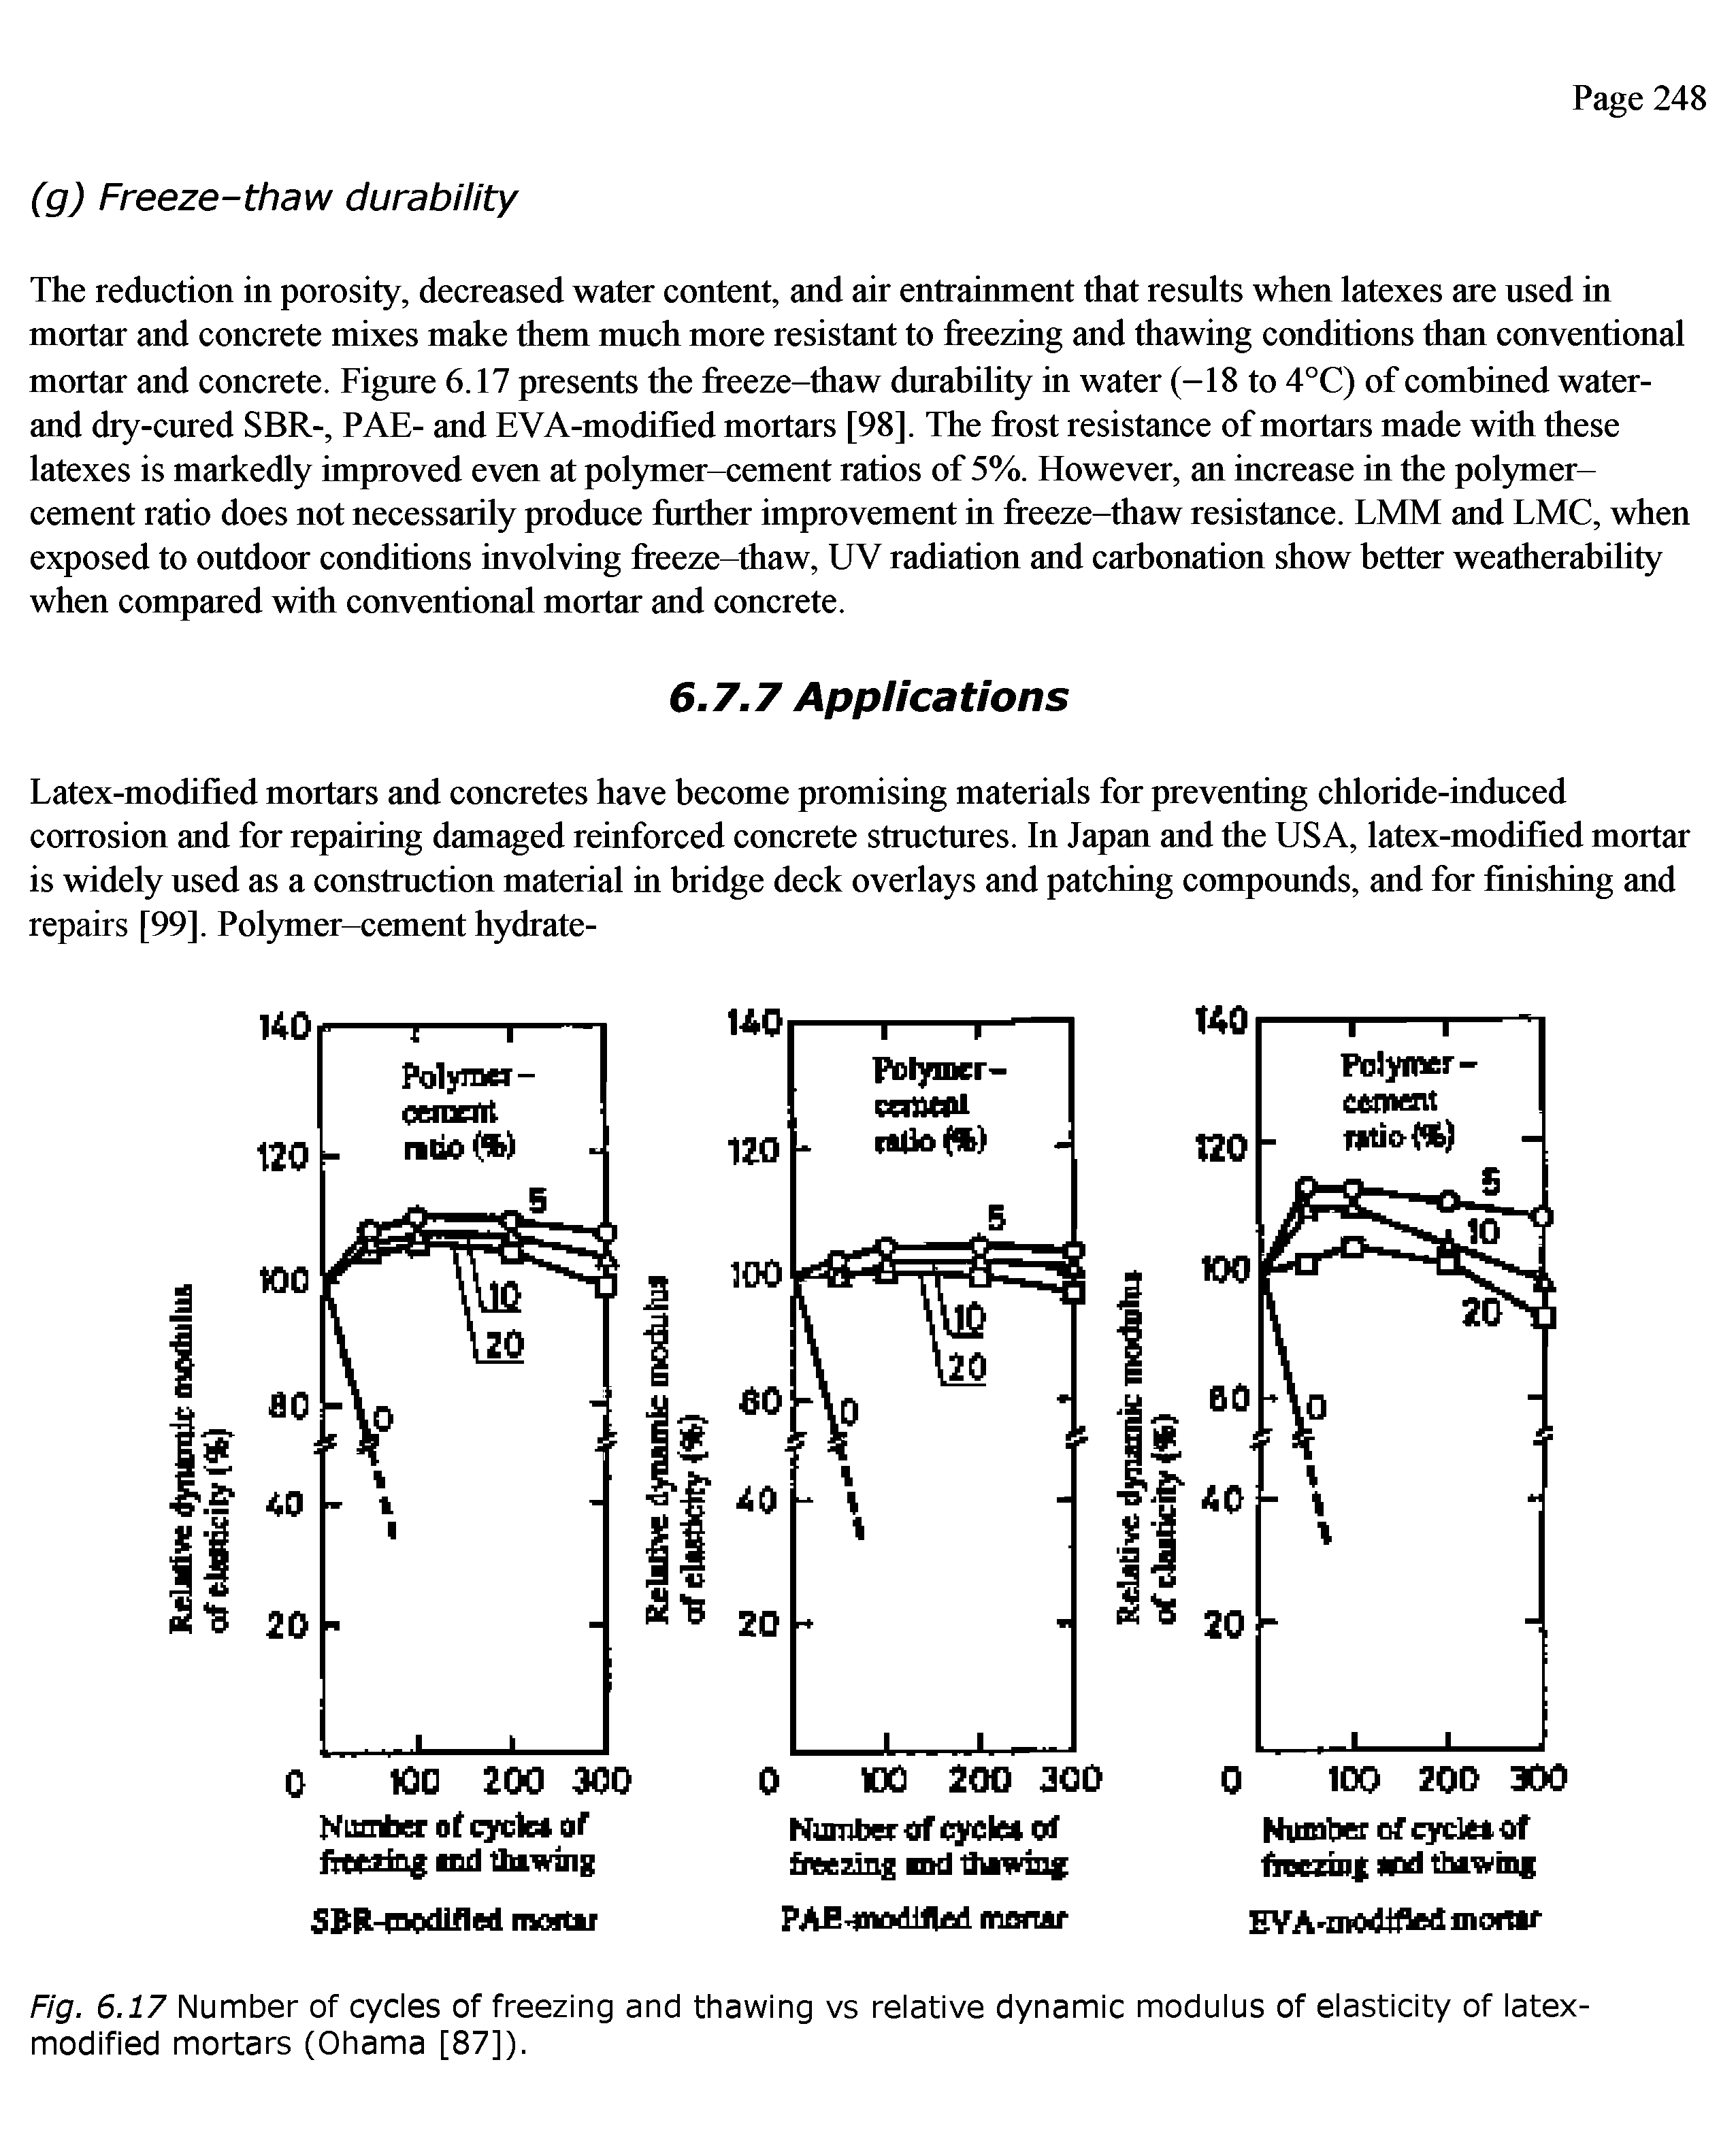 Fig. 6.17 Number of cycles of freezing and thawing vs relative dynamic modulus of elasticity of latex-modified mortars (Ohama [87]).